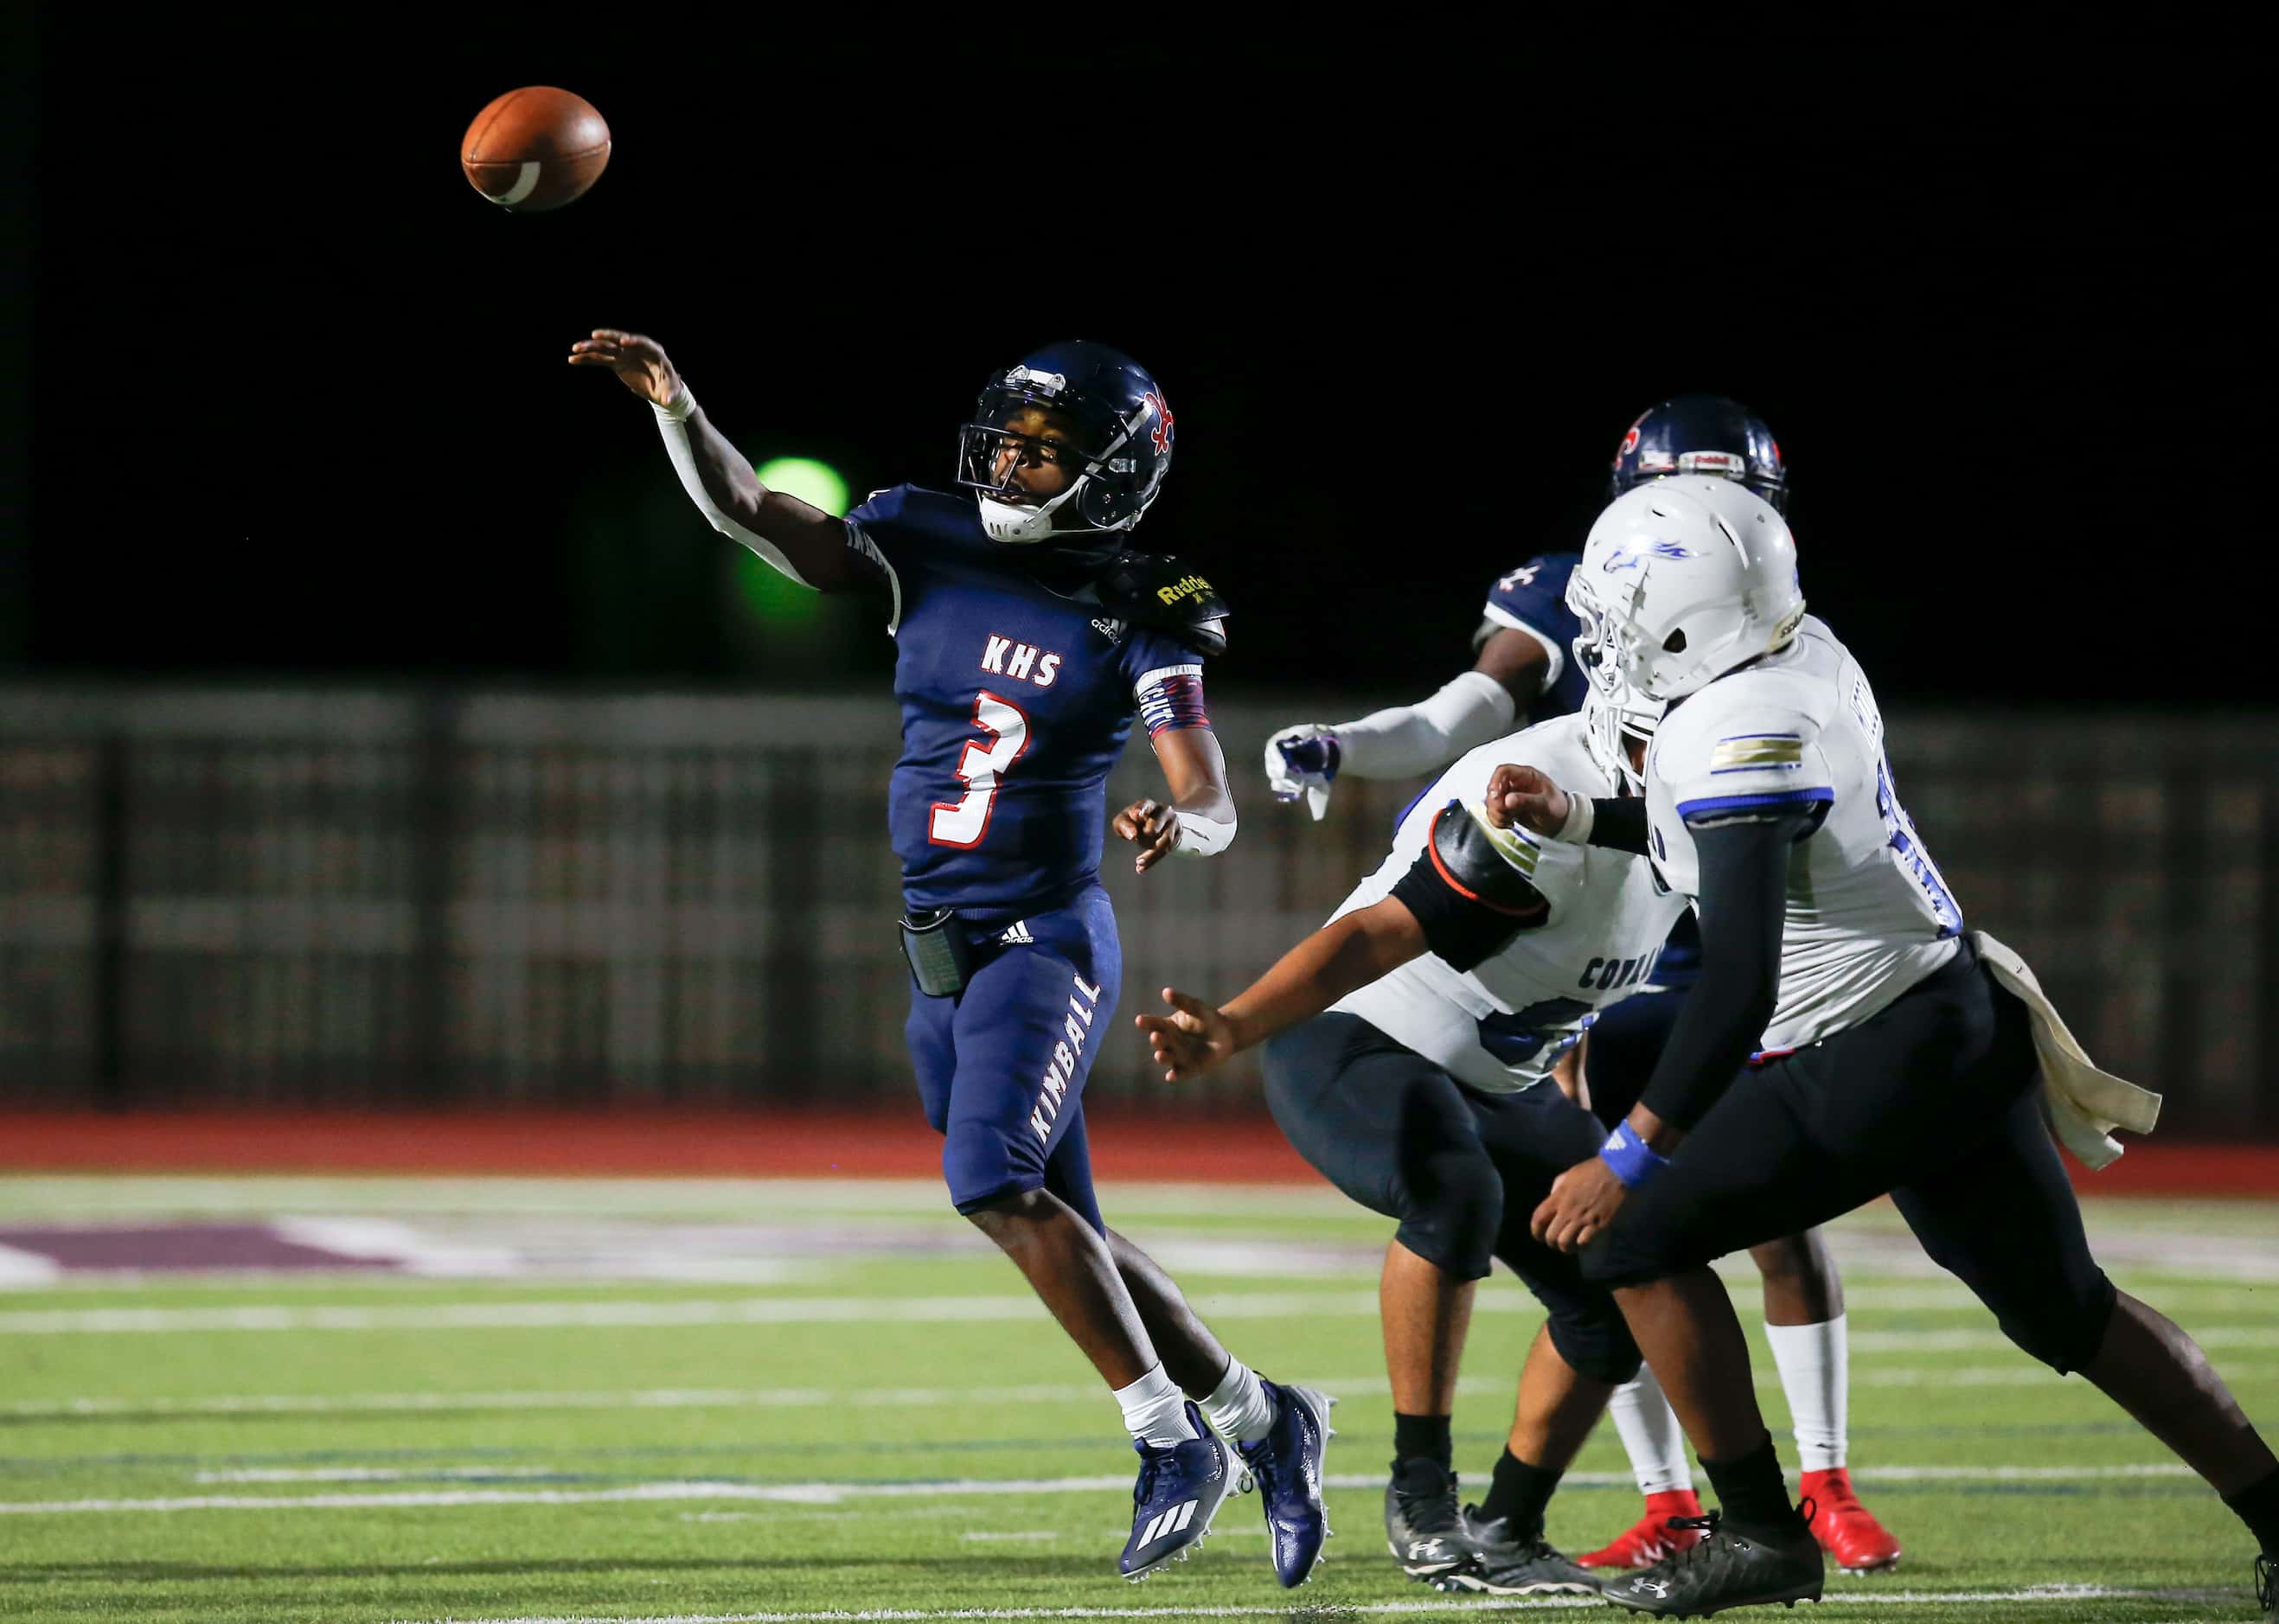 Kimball senior quarterback Jerqualan Parks throws during the first half of a high school...